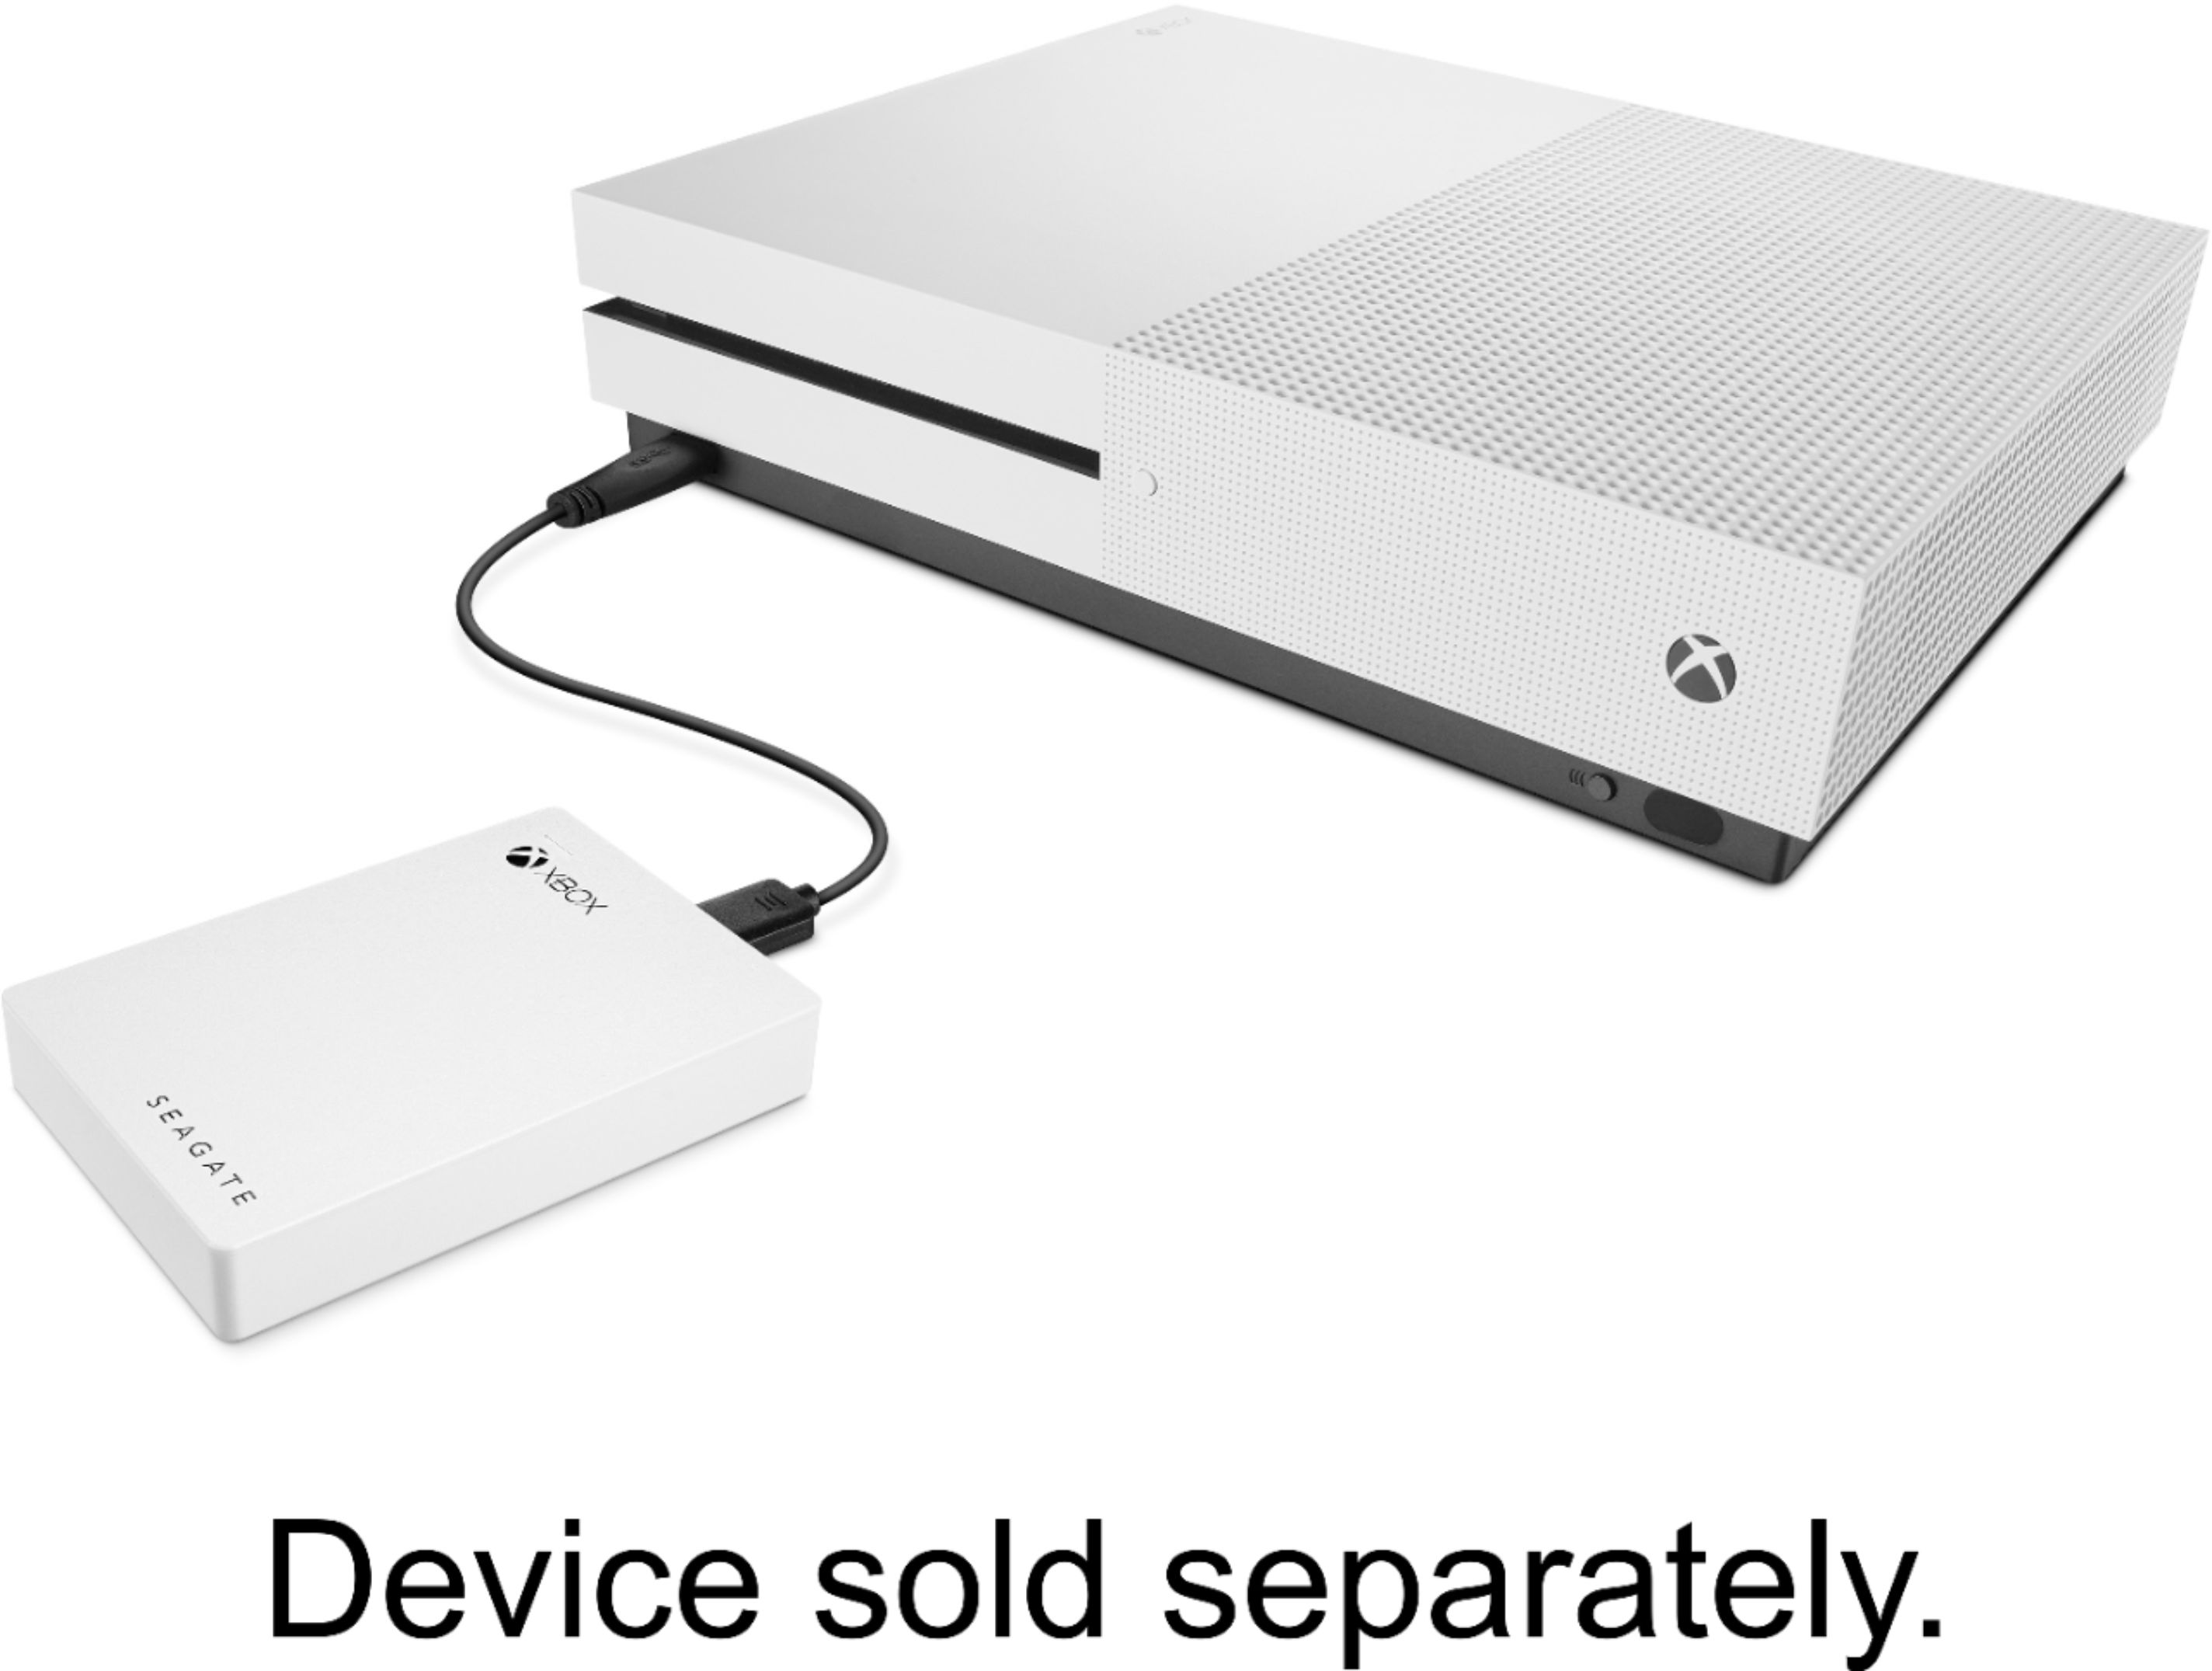 4tb external hard drive for xbox one